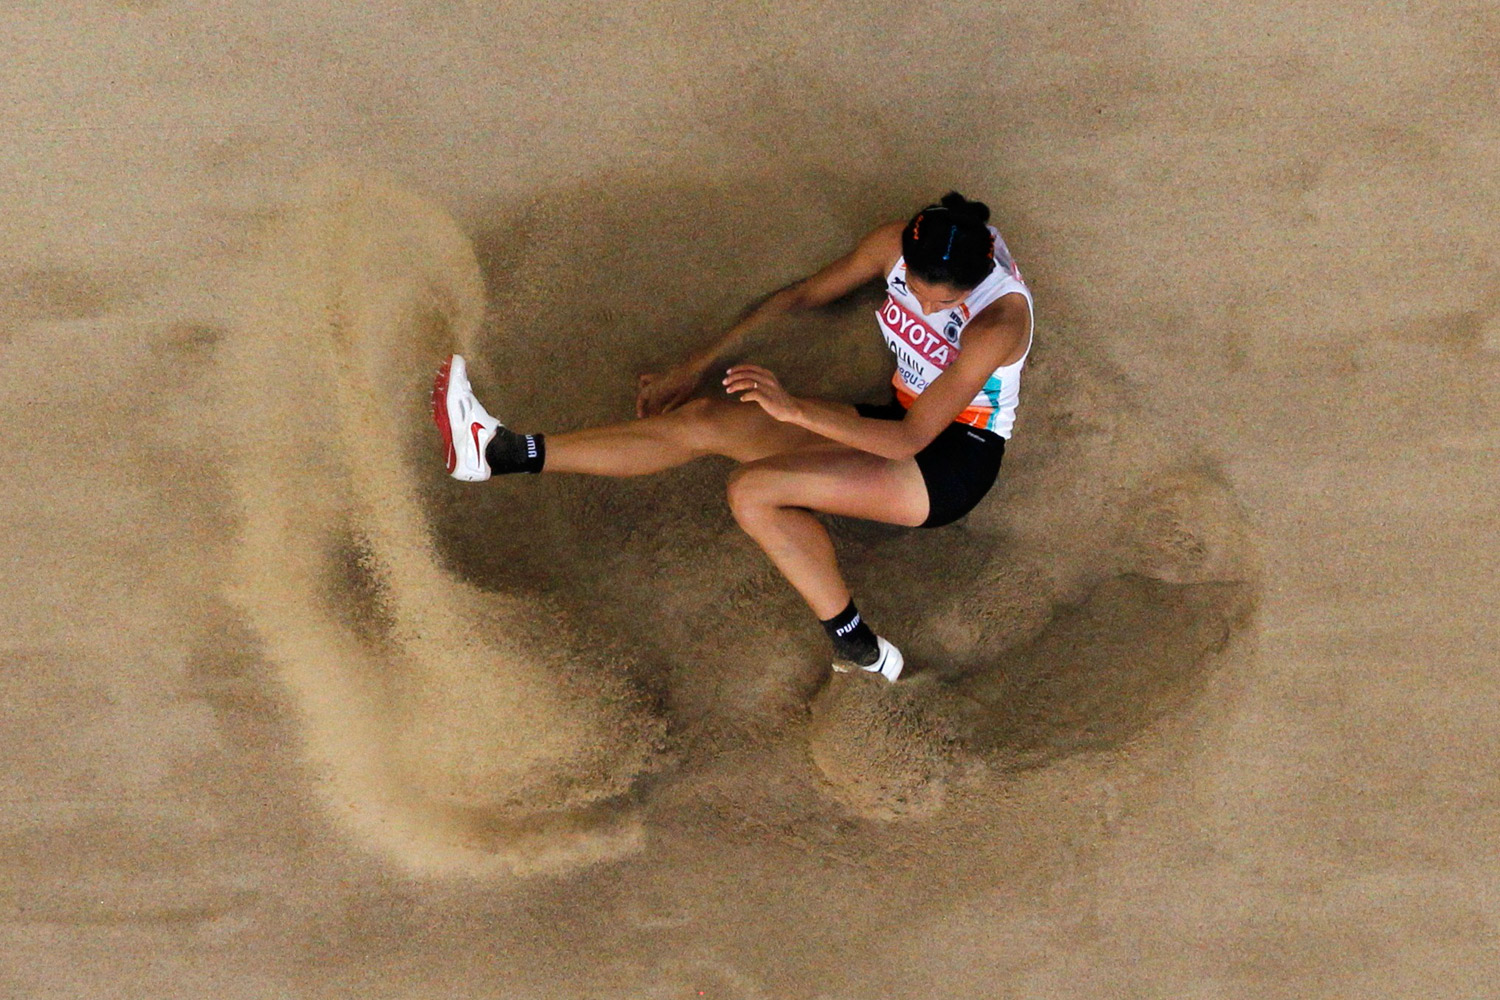 Mayookha Johny of India competes during the women's long jump final at the IAAF World Championships in Daegu, South Korea, August 28, 2011.